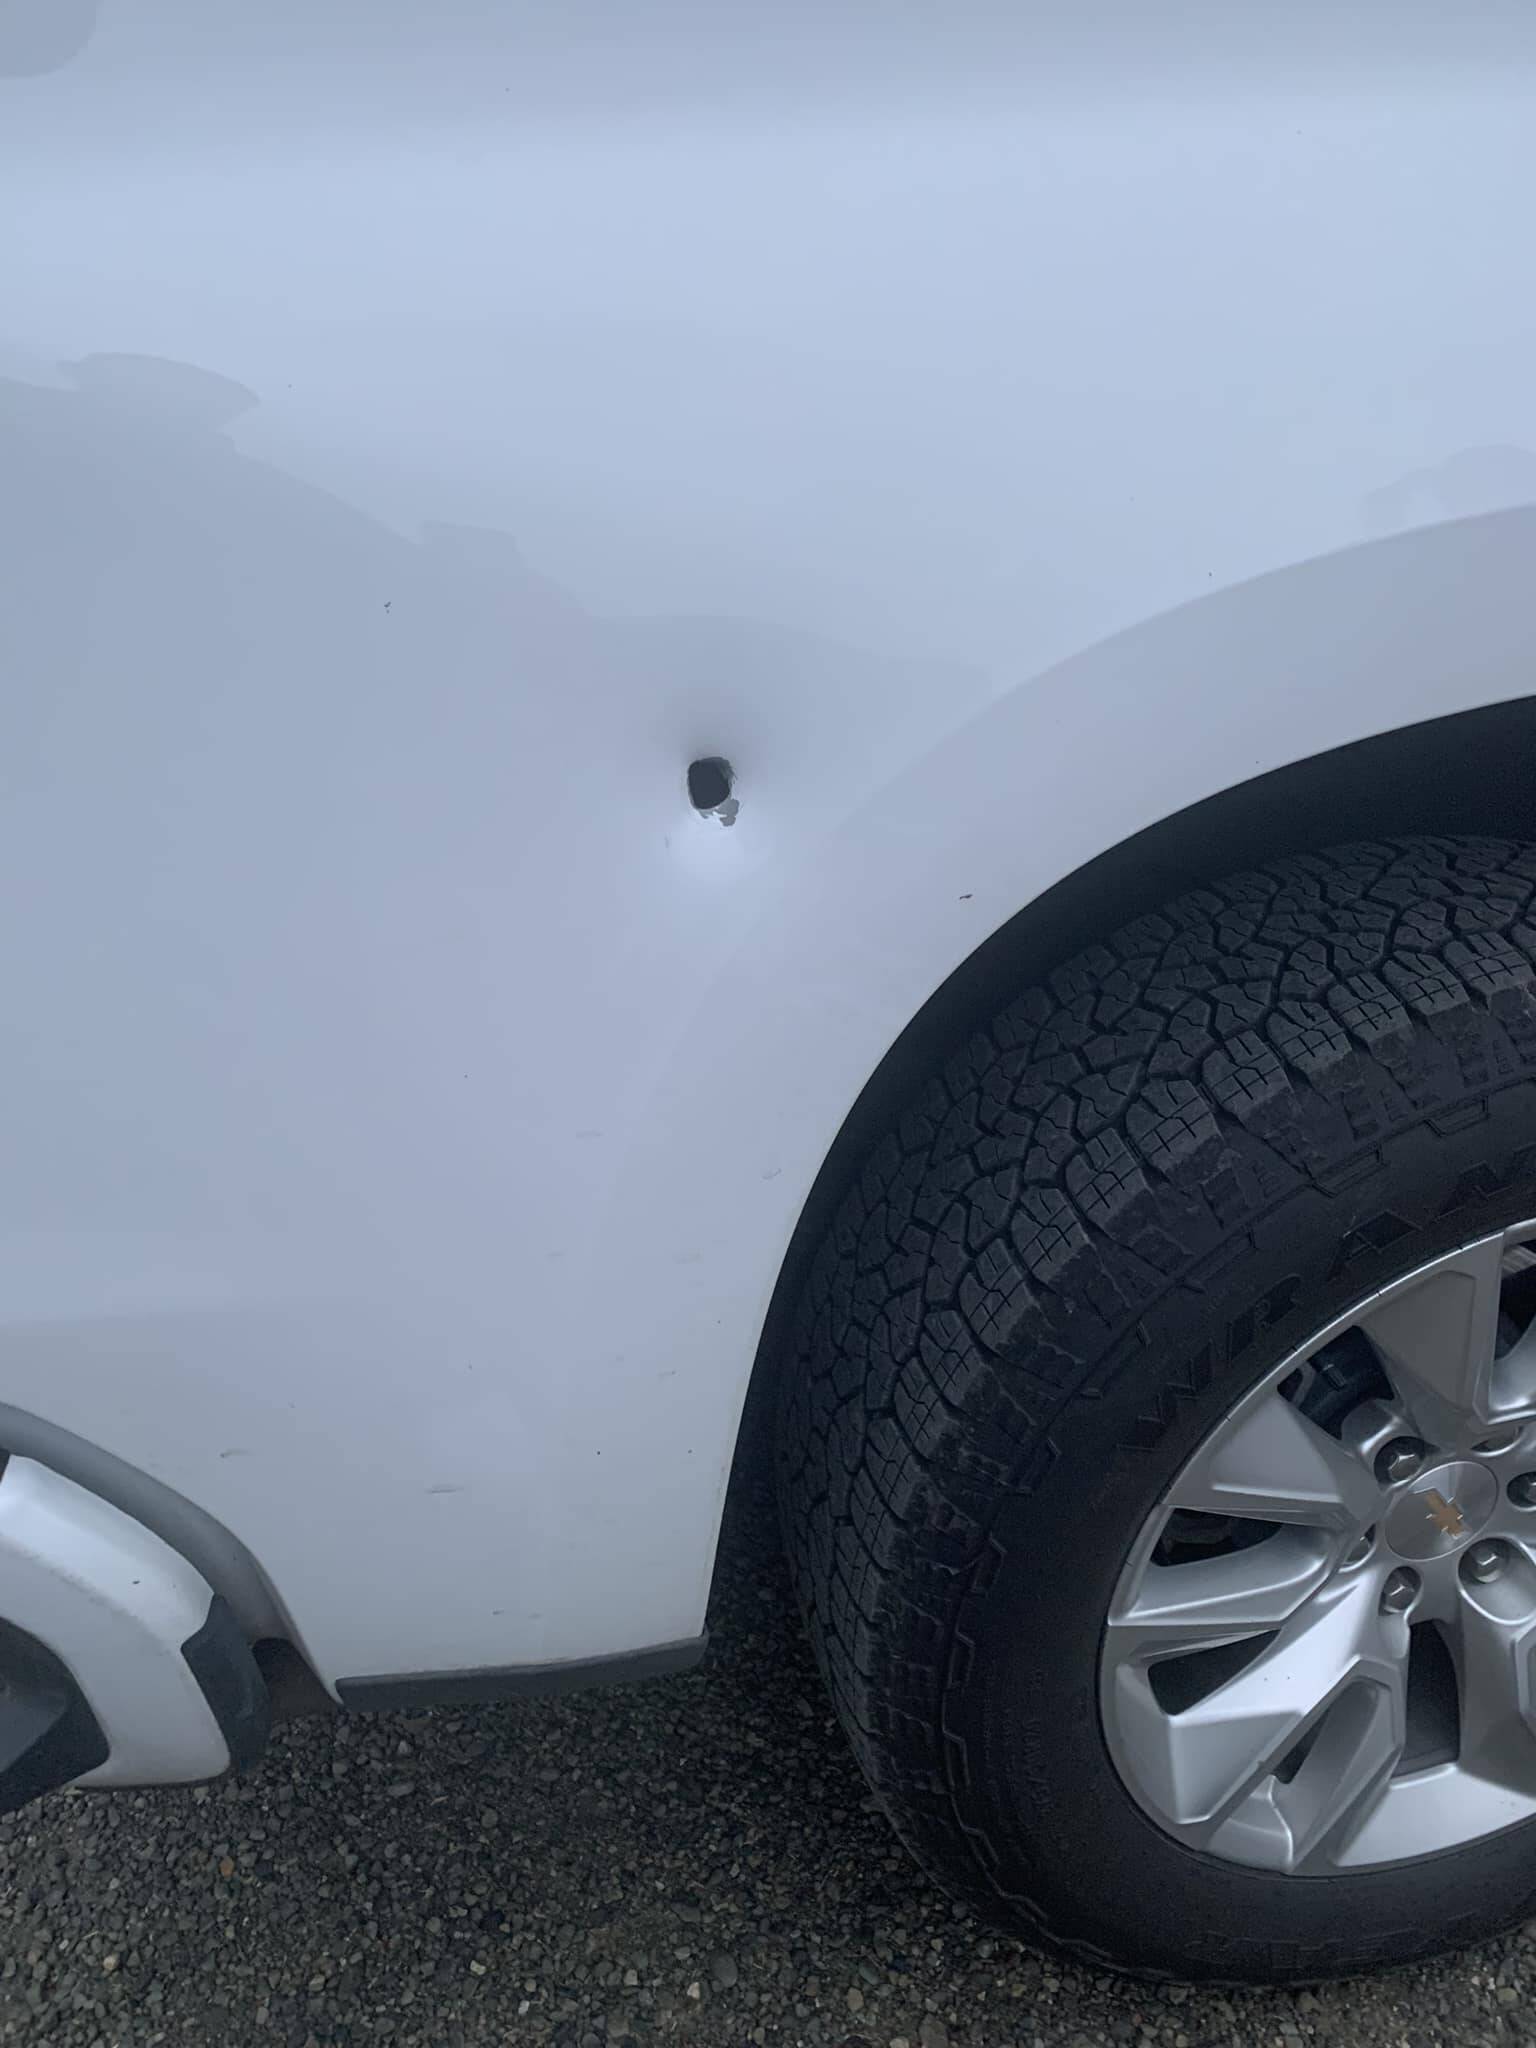 A man experiencing a mental health crisis shot at a sheriff’s office patrol vehicle, hitting it once. (Courtesy photo / Grays Harbor Sheriff’s Office)